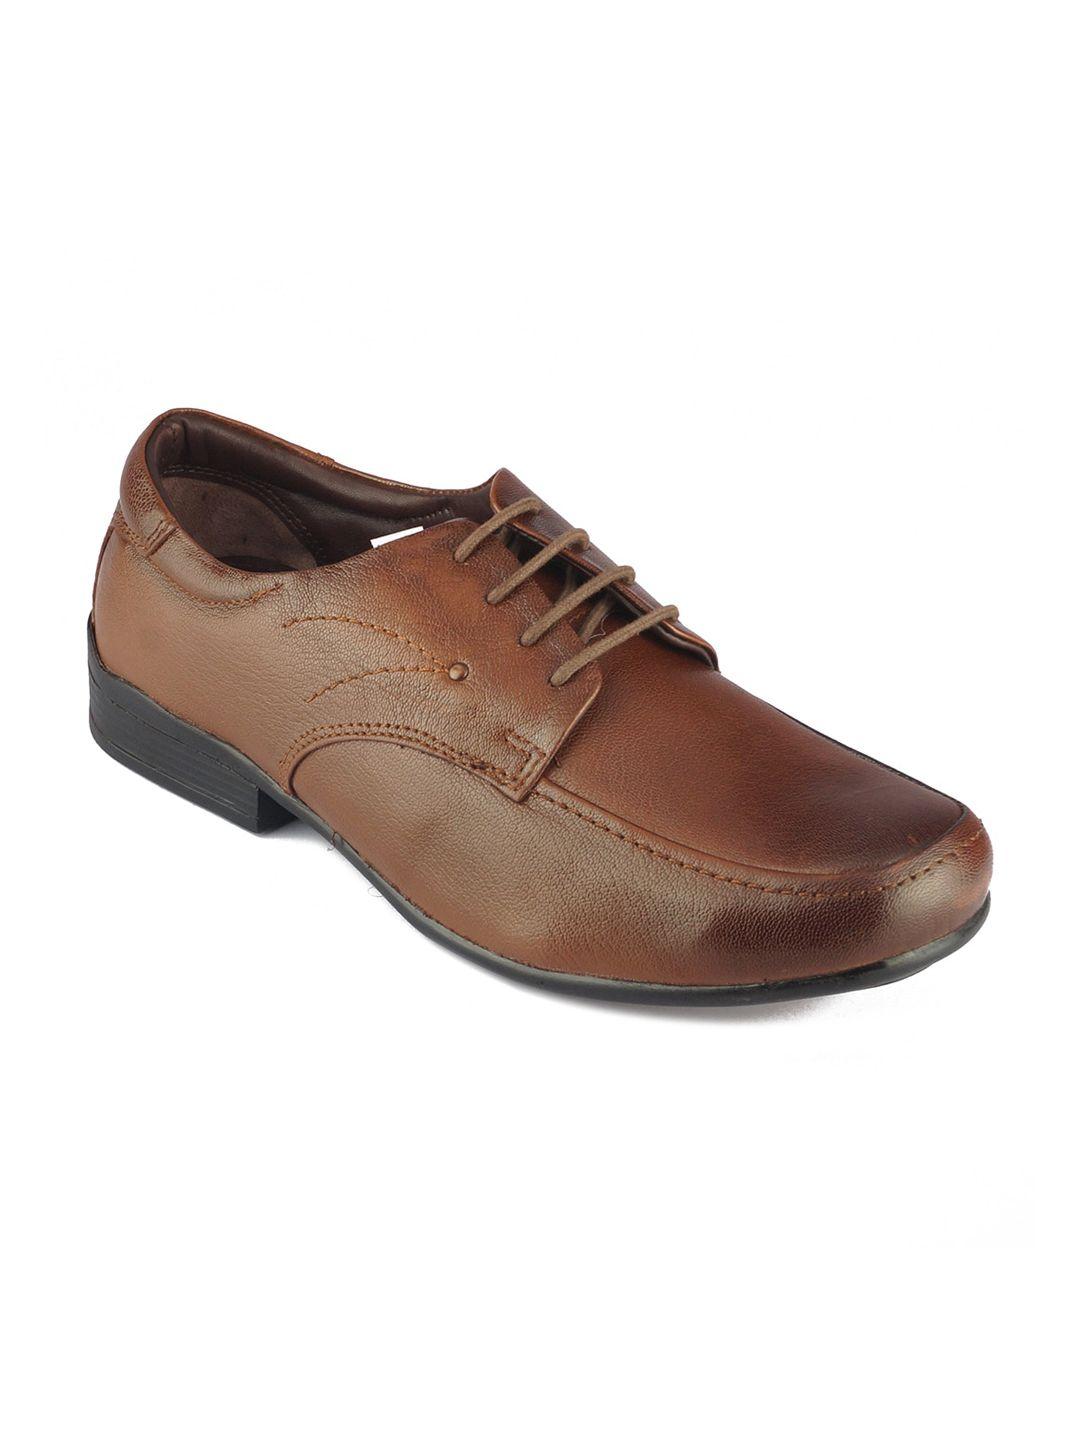 red chief men tan-brown solid leather formal derbys